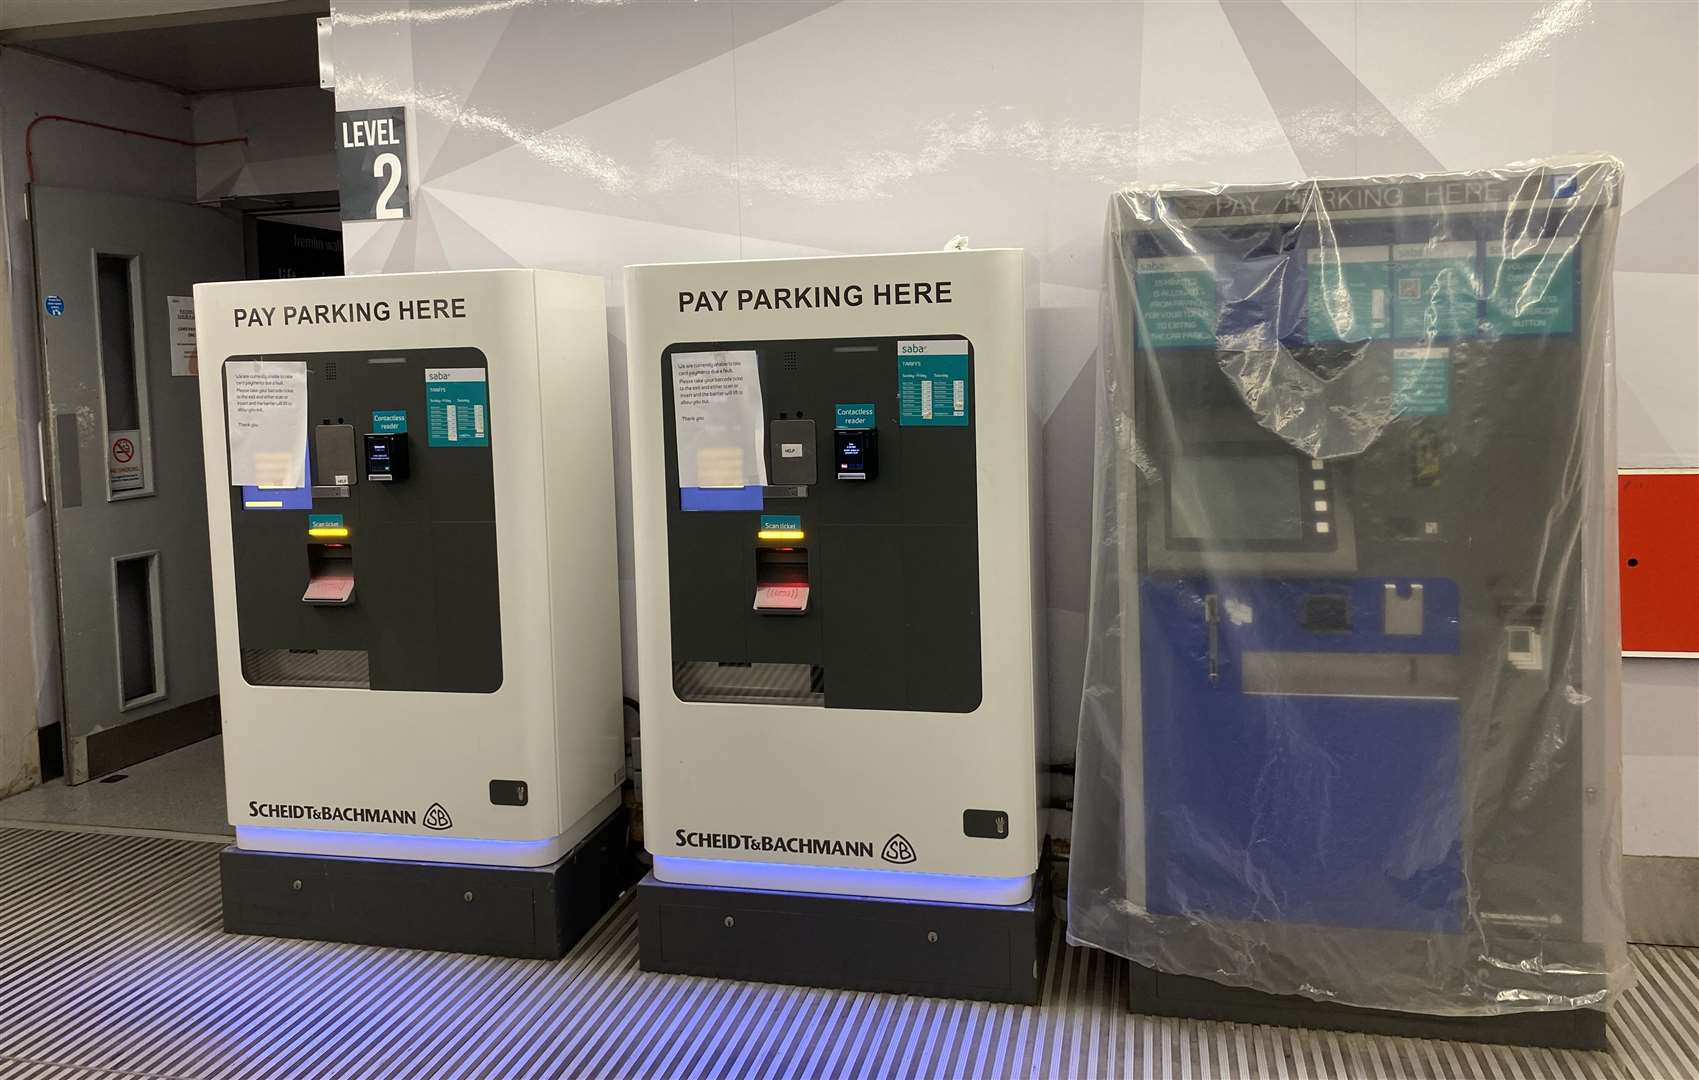 The new ticketing systems that are being installed, versus one of the old machines, right